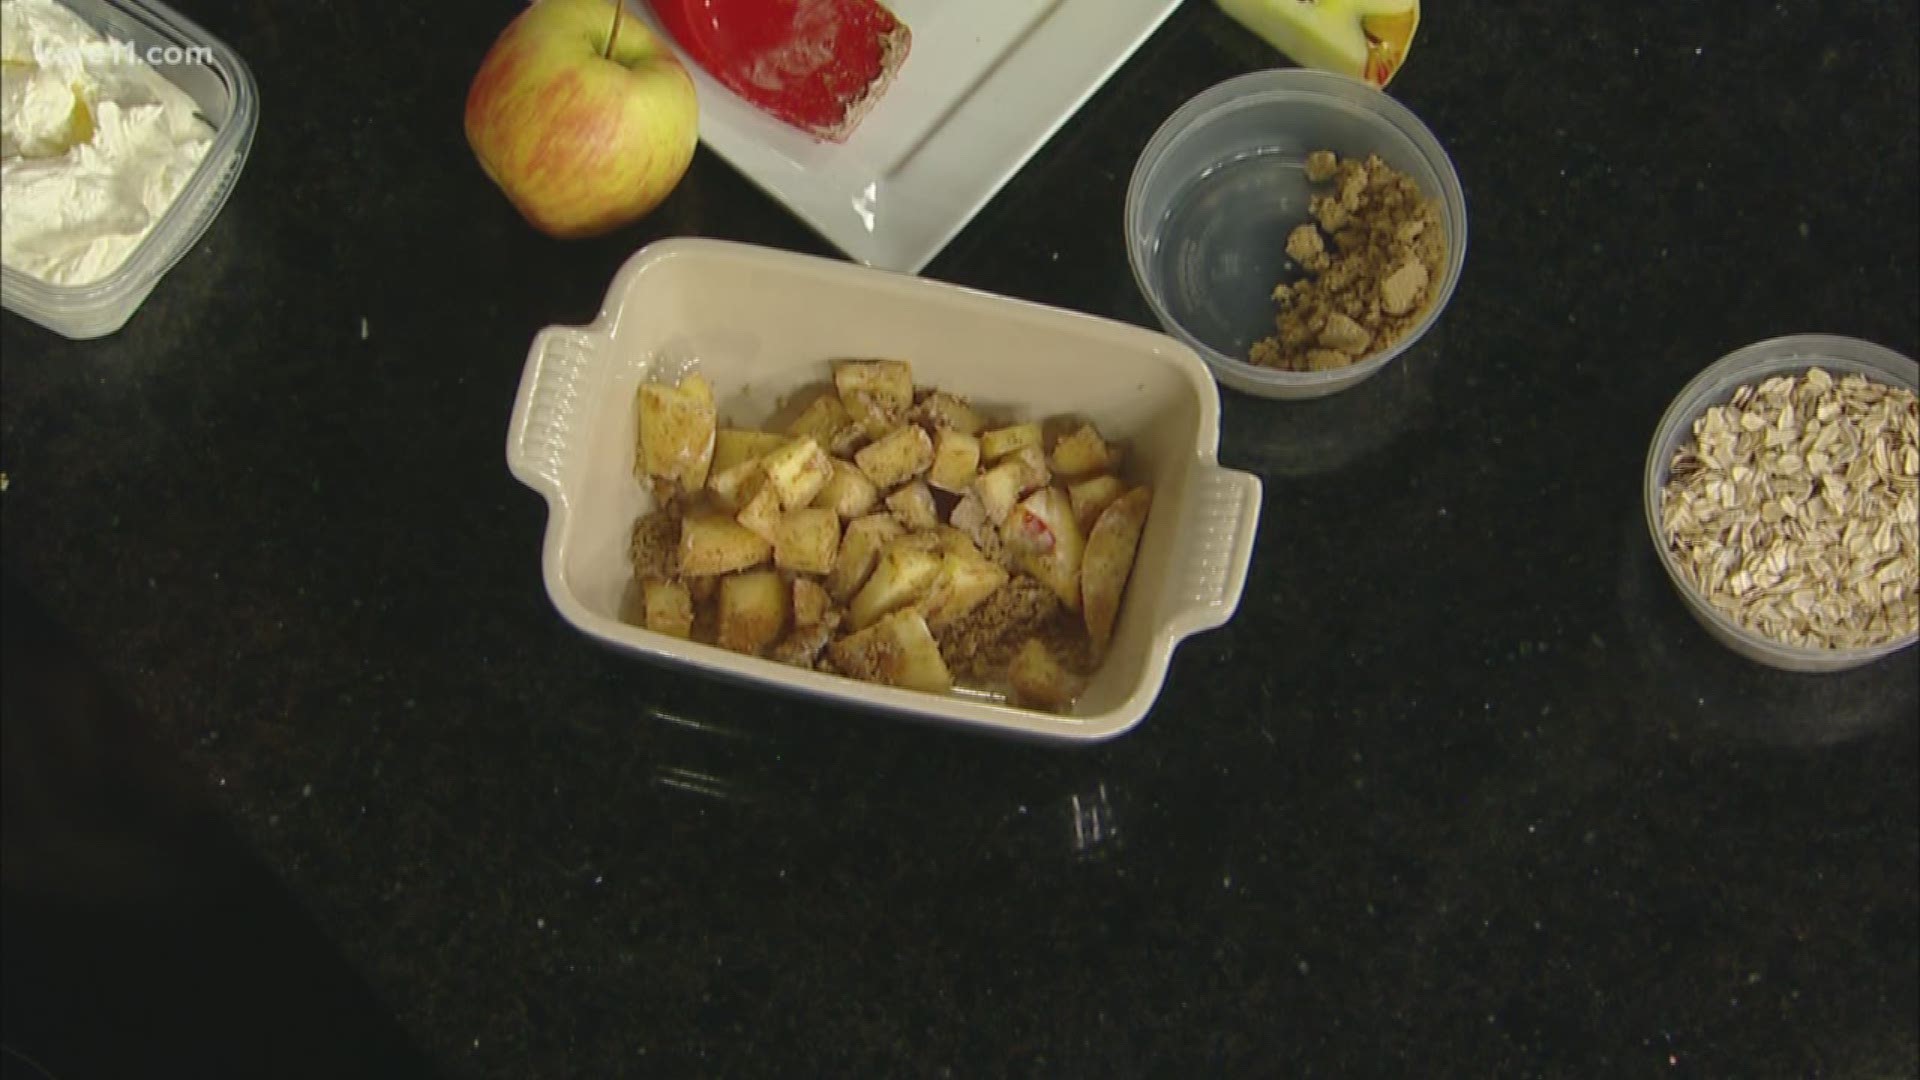 Pie is a Thanksgiving dessert staple, but why not try something different this year...how about a cobbler?